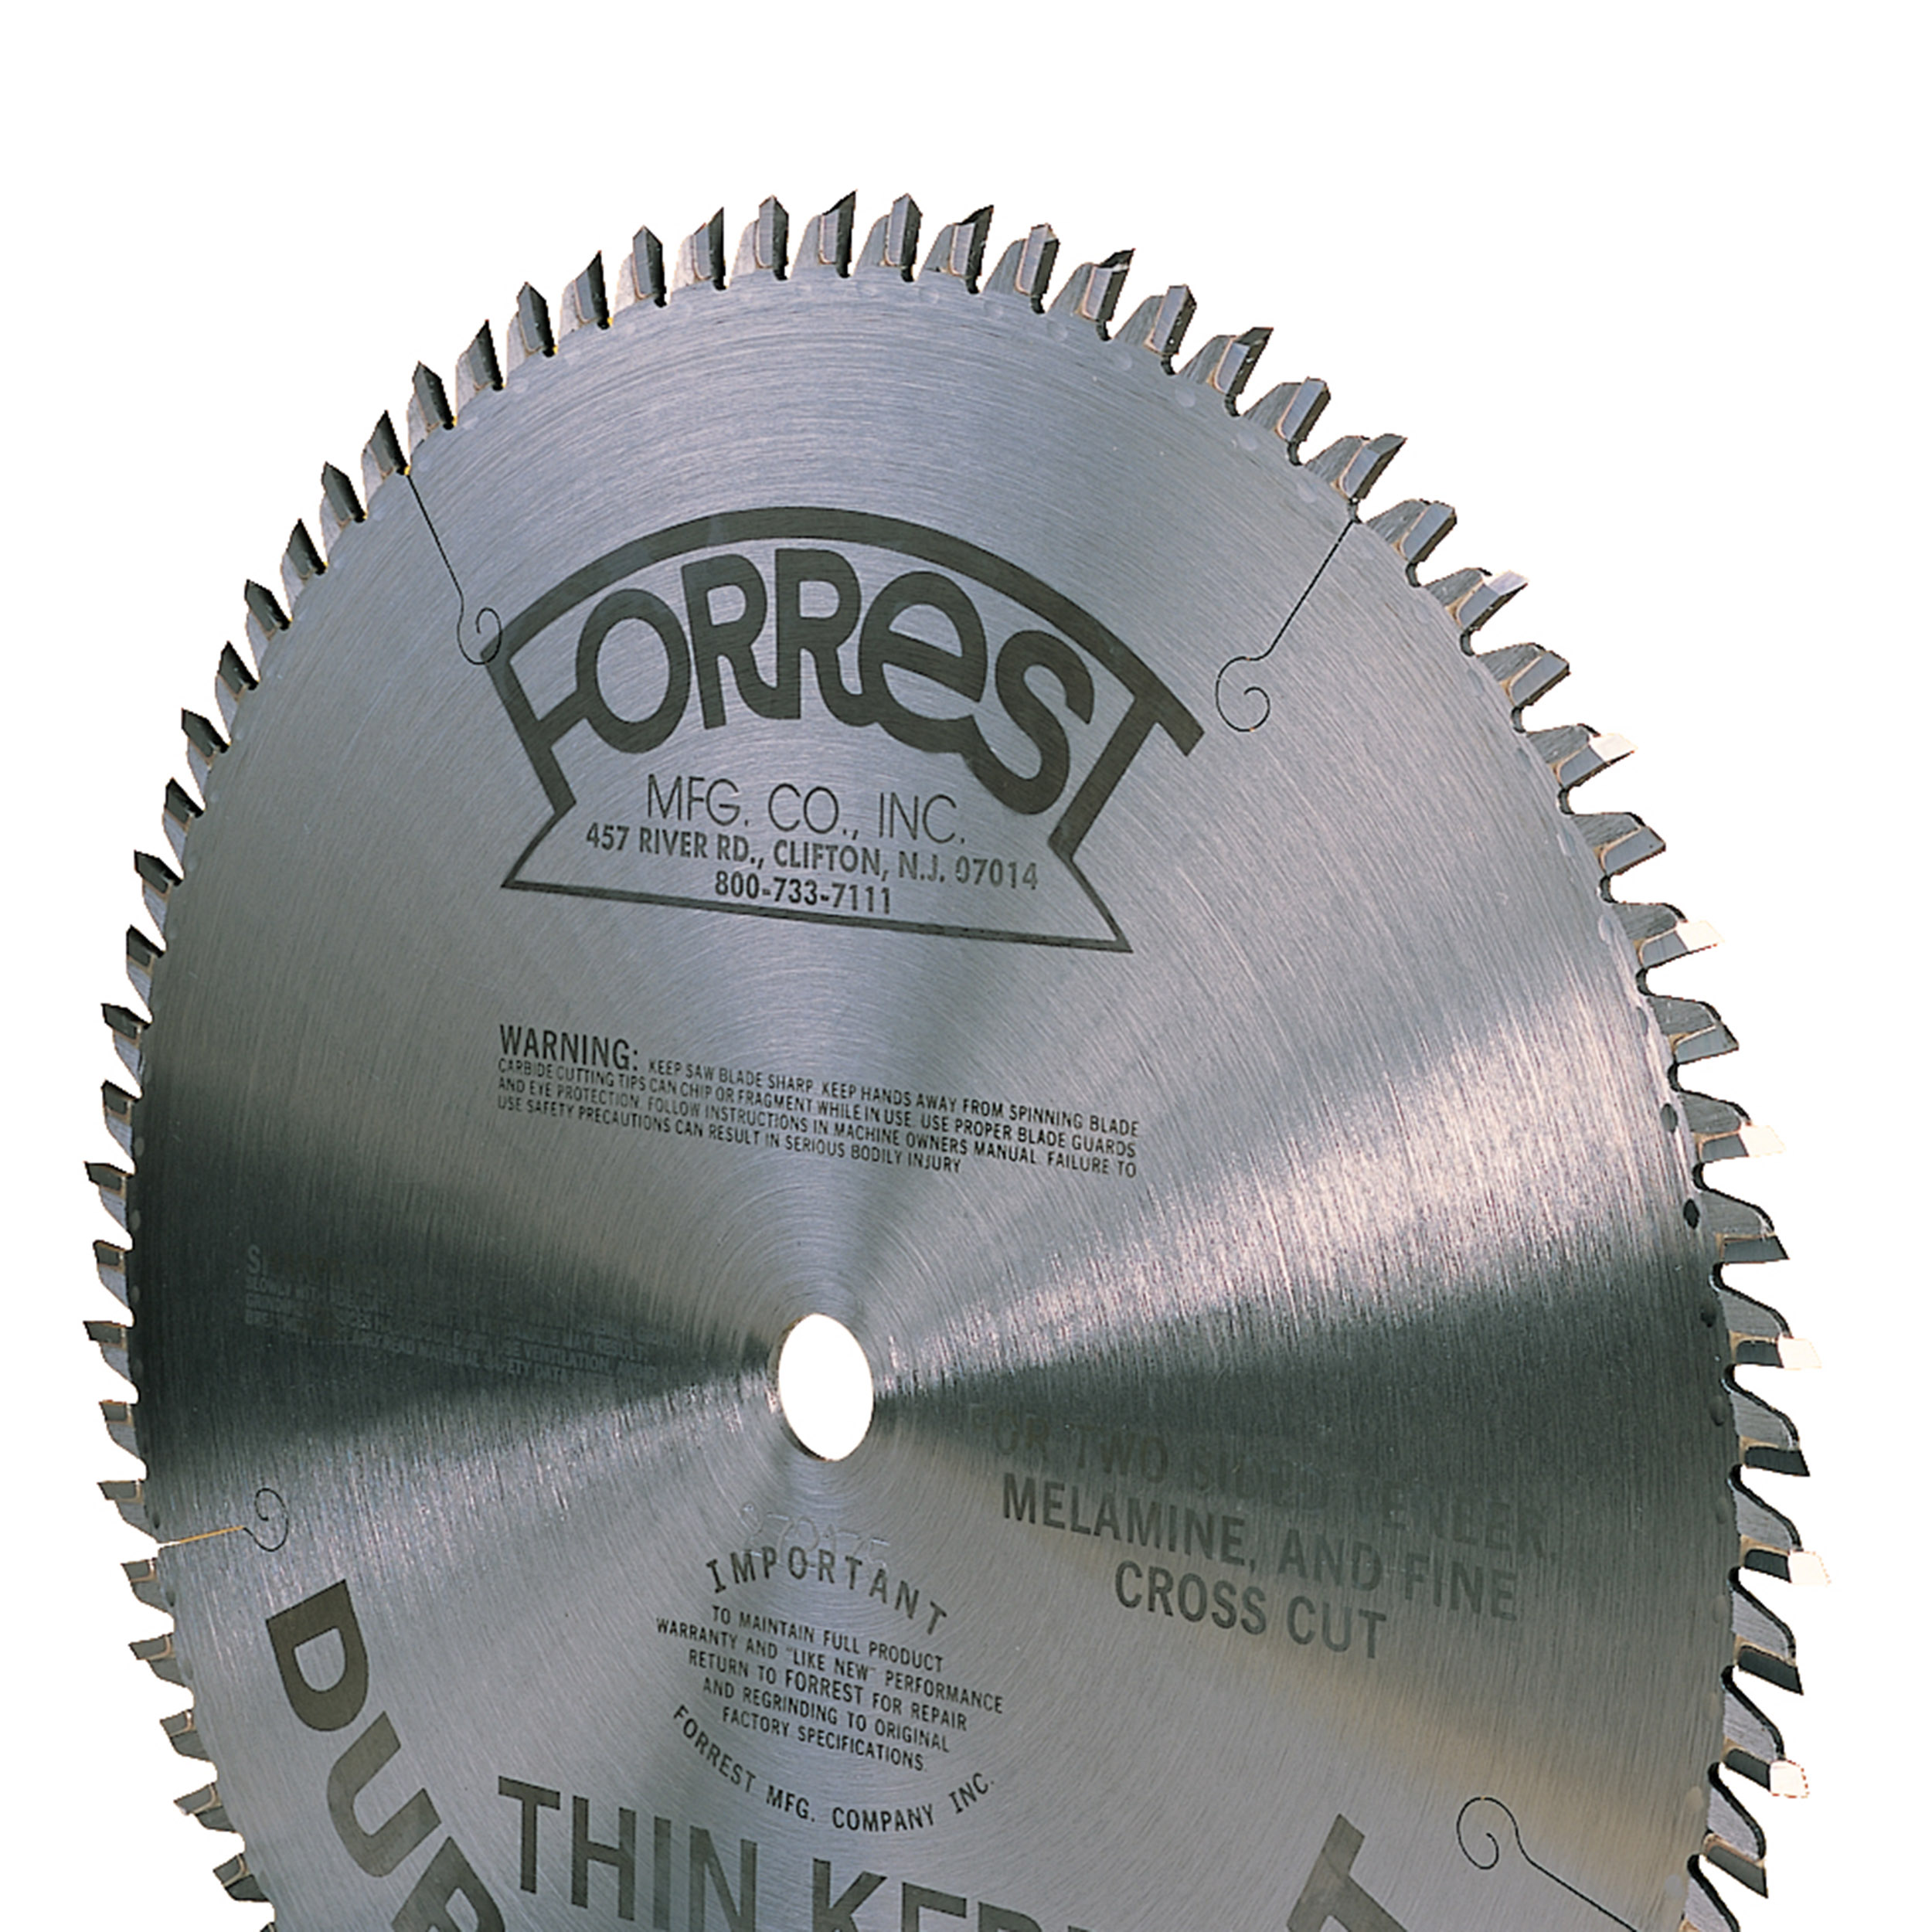 Forrest Dh121007125 Duraline Hi-a/t Saw Blade, 12" X 100 Tooth, .125" Kerf